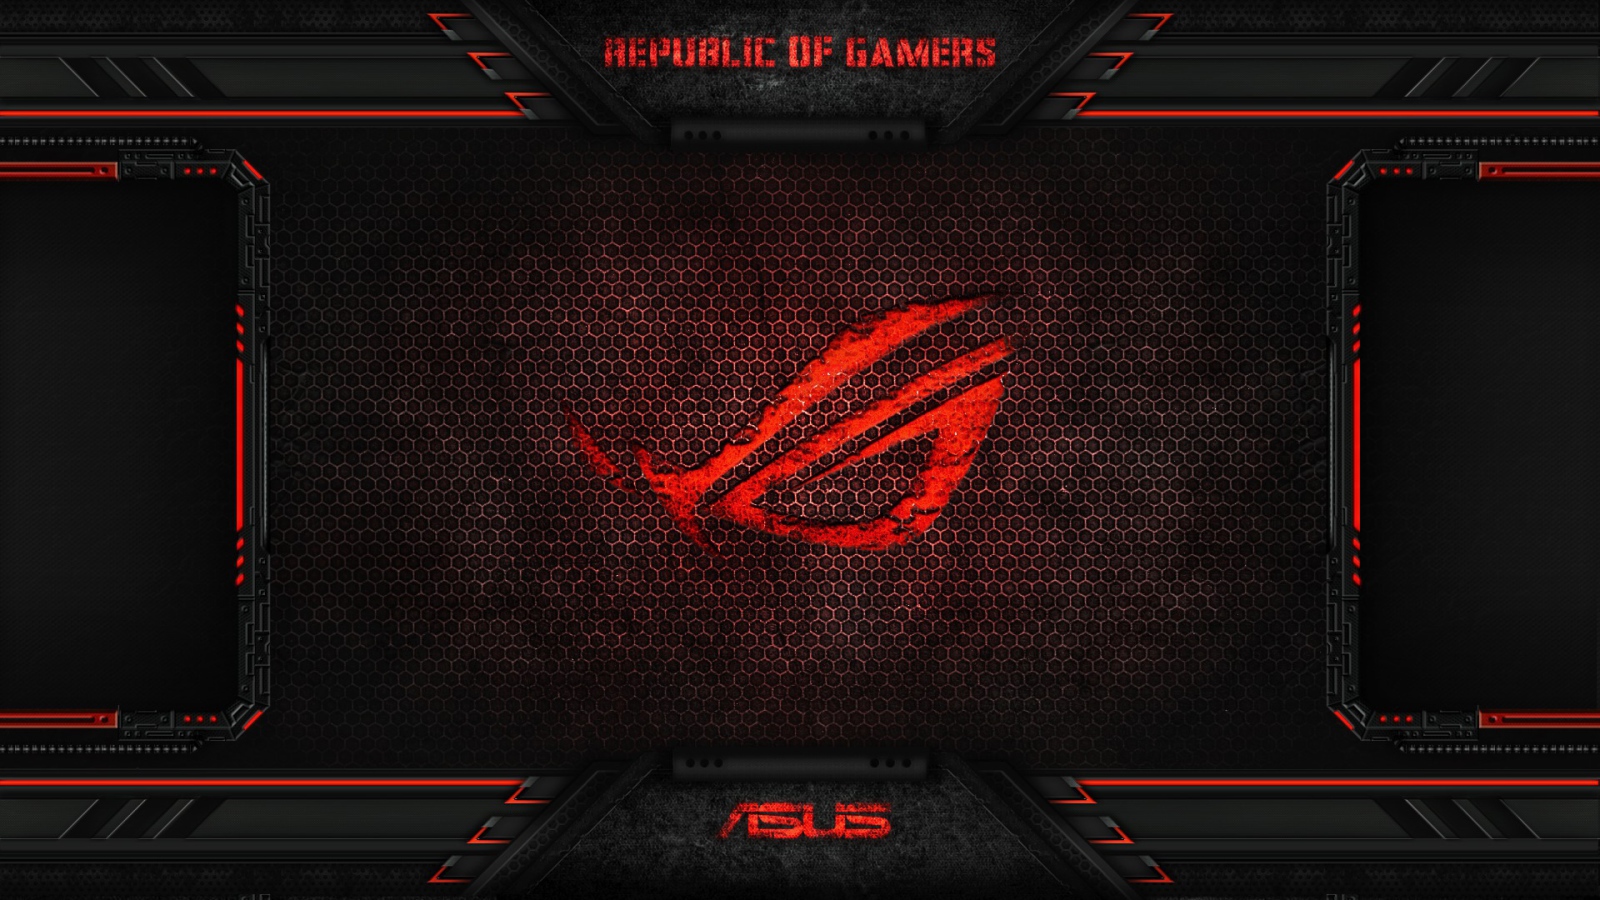 Republic of gamers from ASUS